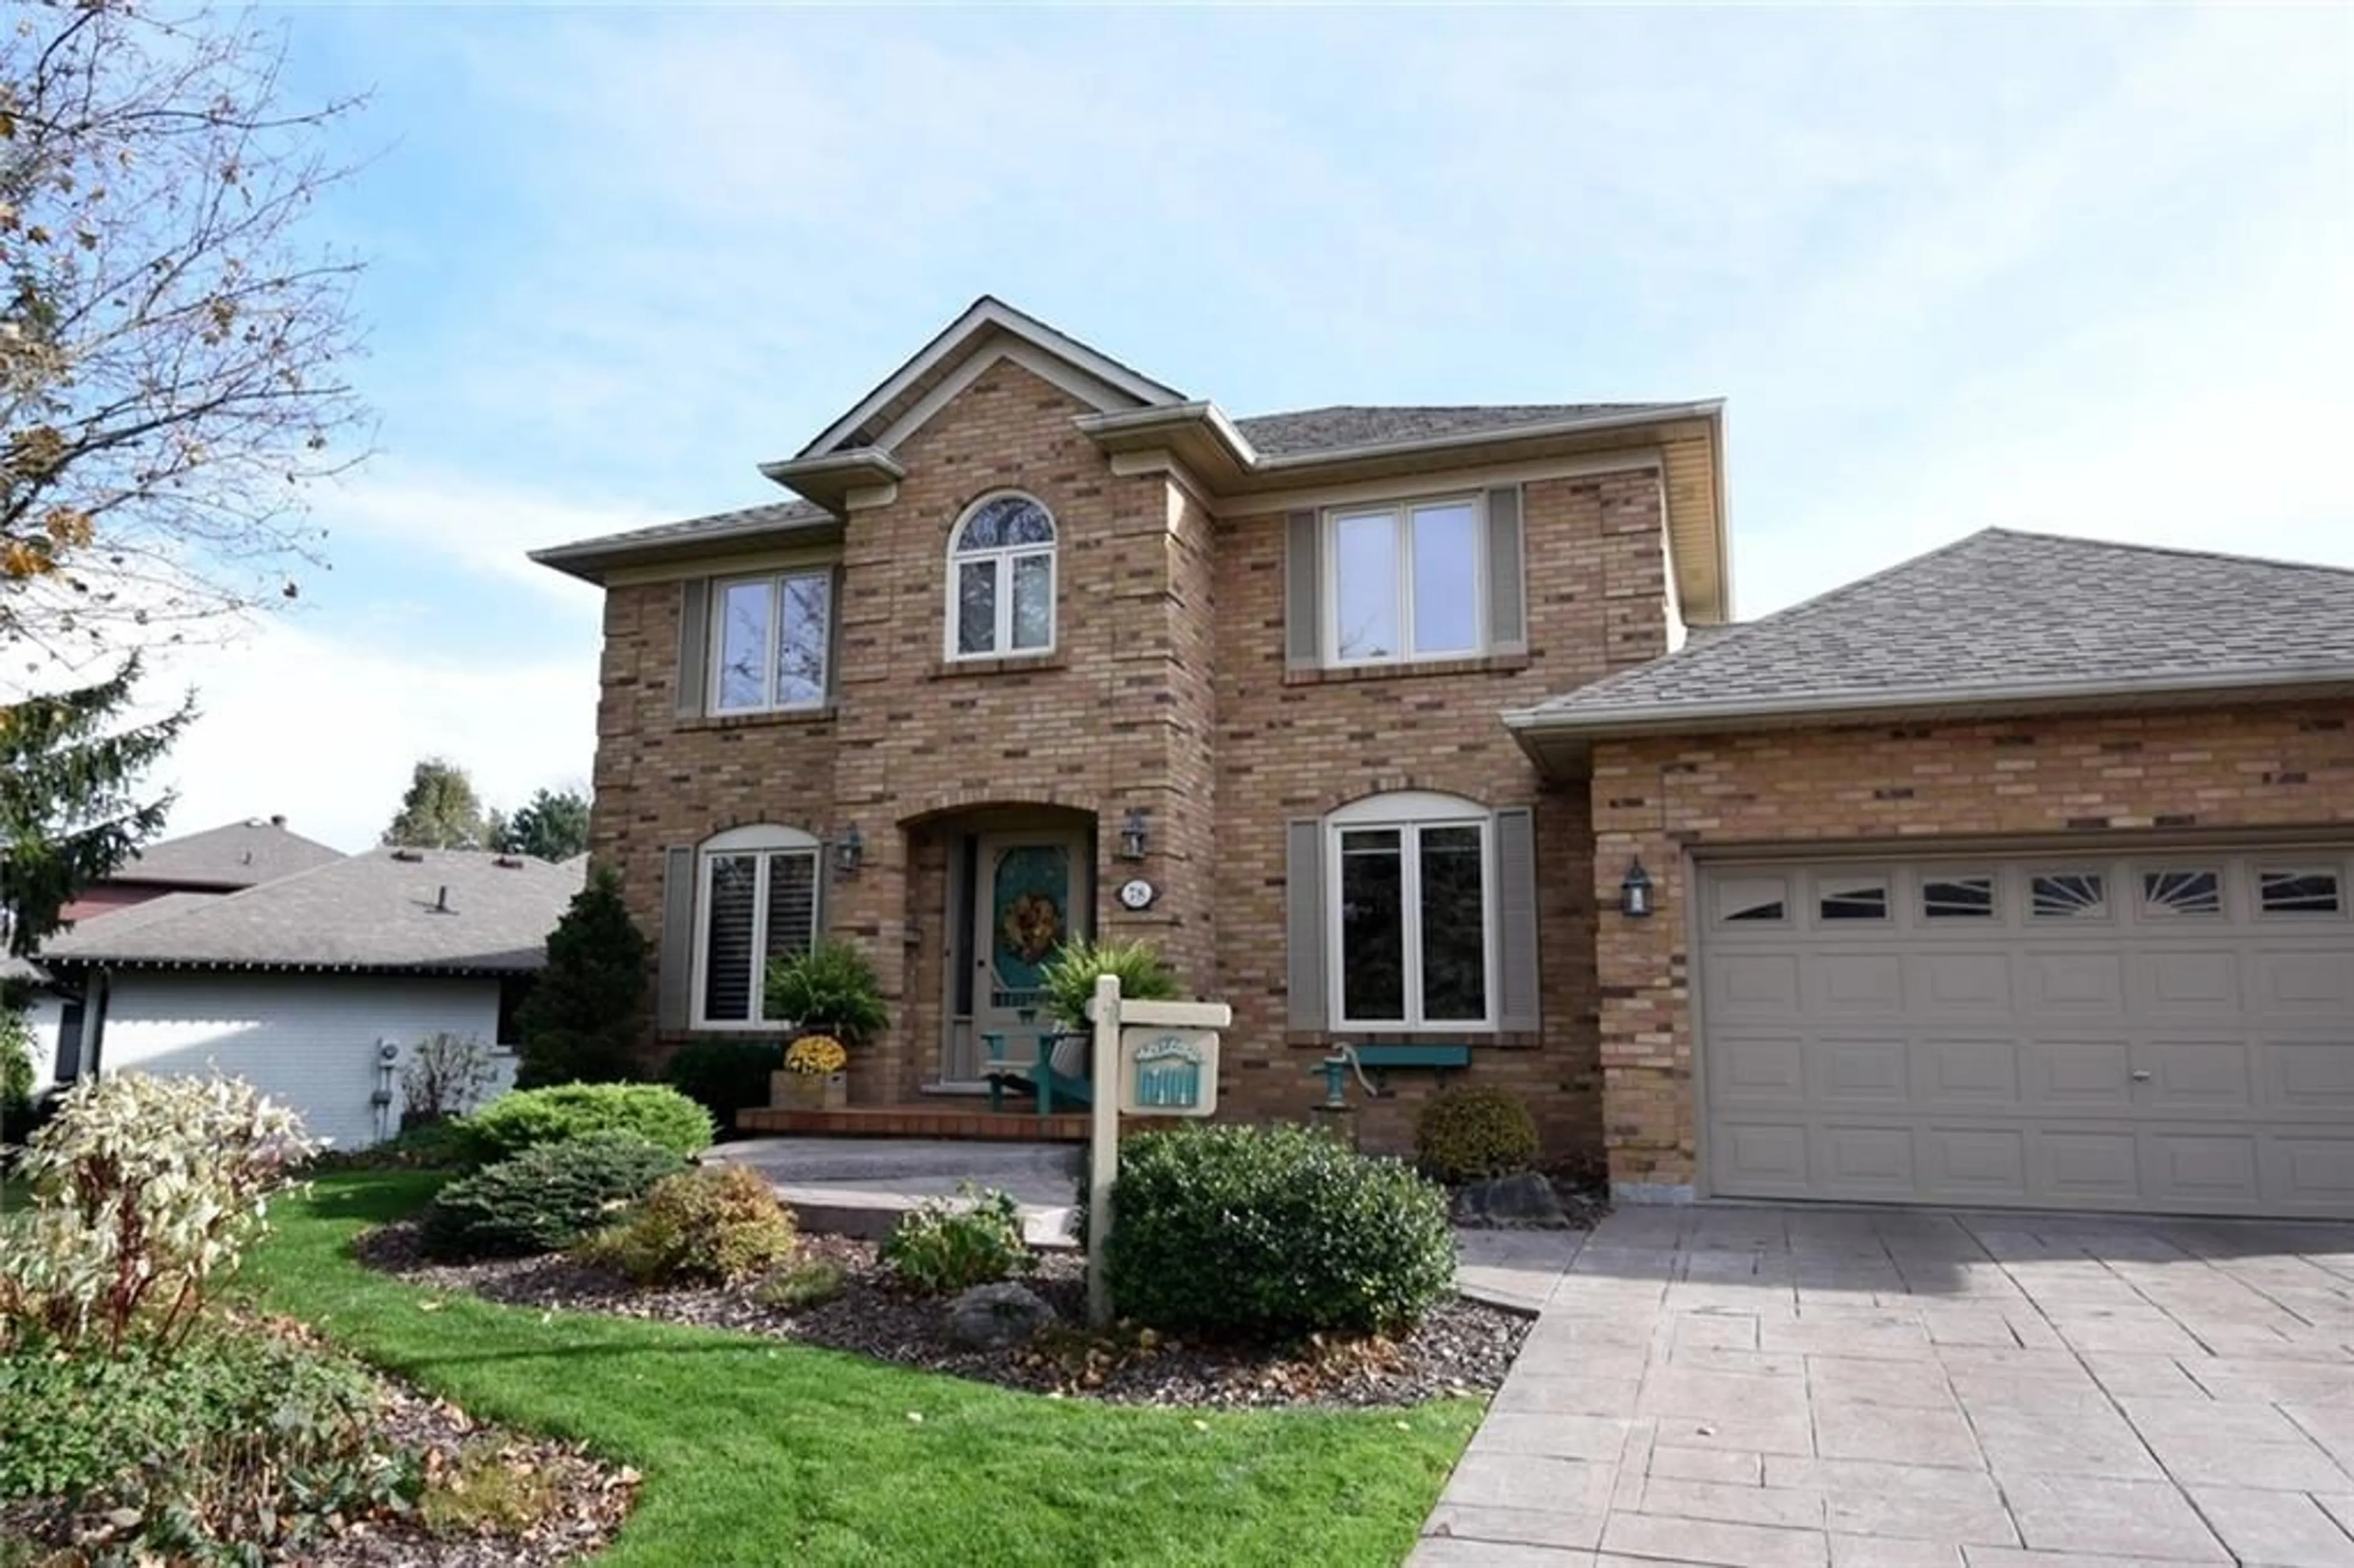 Home with brick exterior material for 78 TERRENCE PARK Dr, Ancaster Ontario L9G 1C2